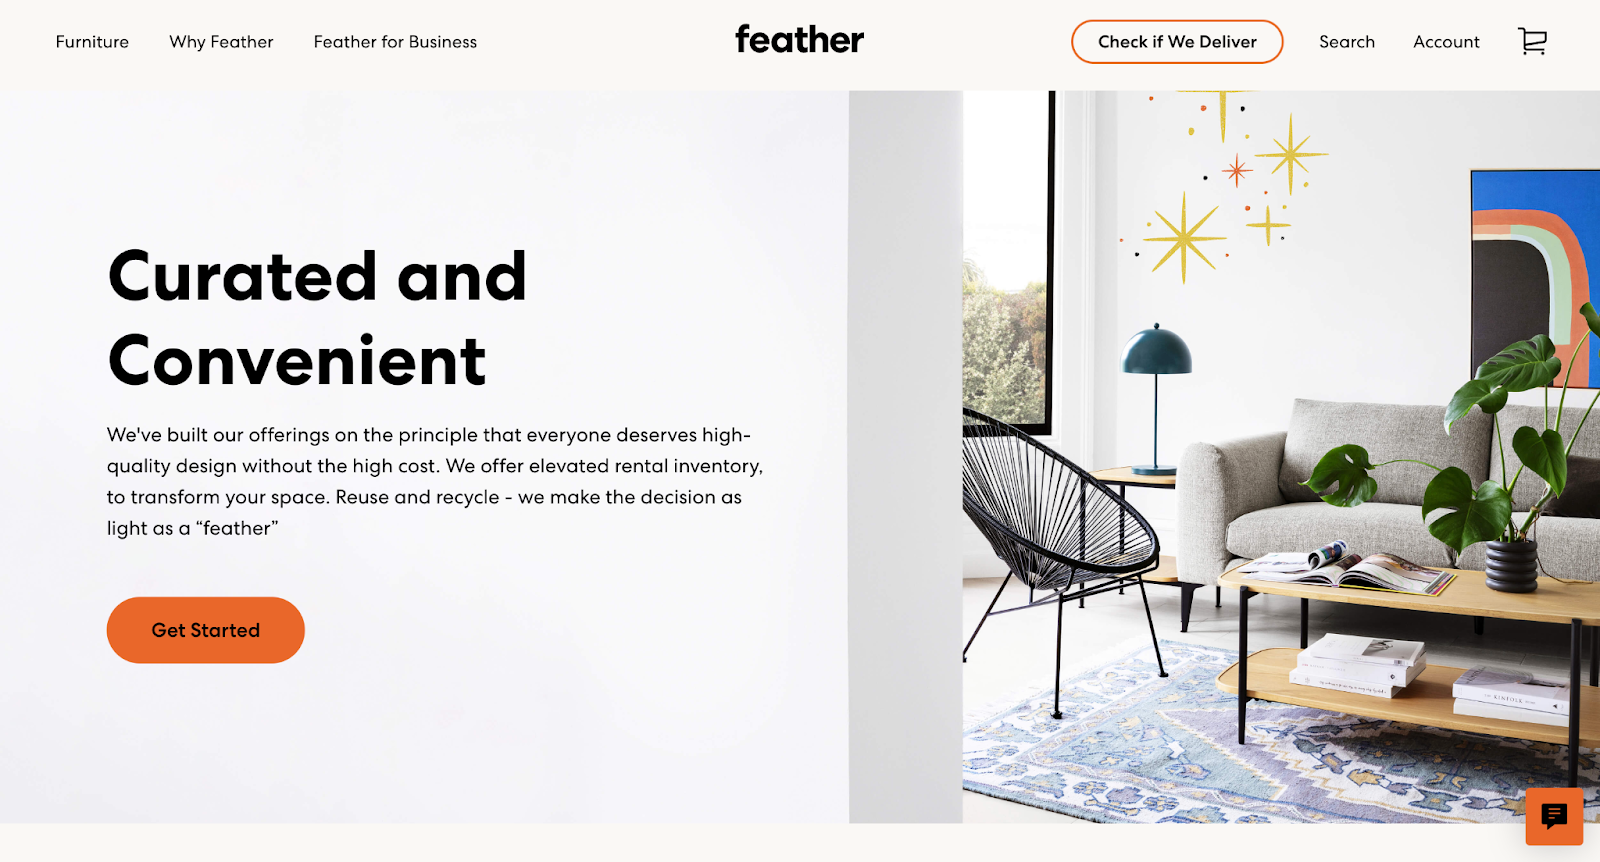 single product website example: Feather Furniture